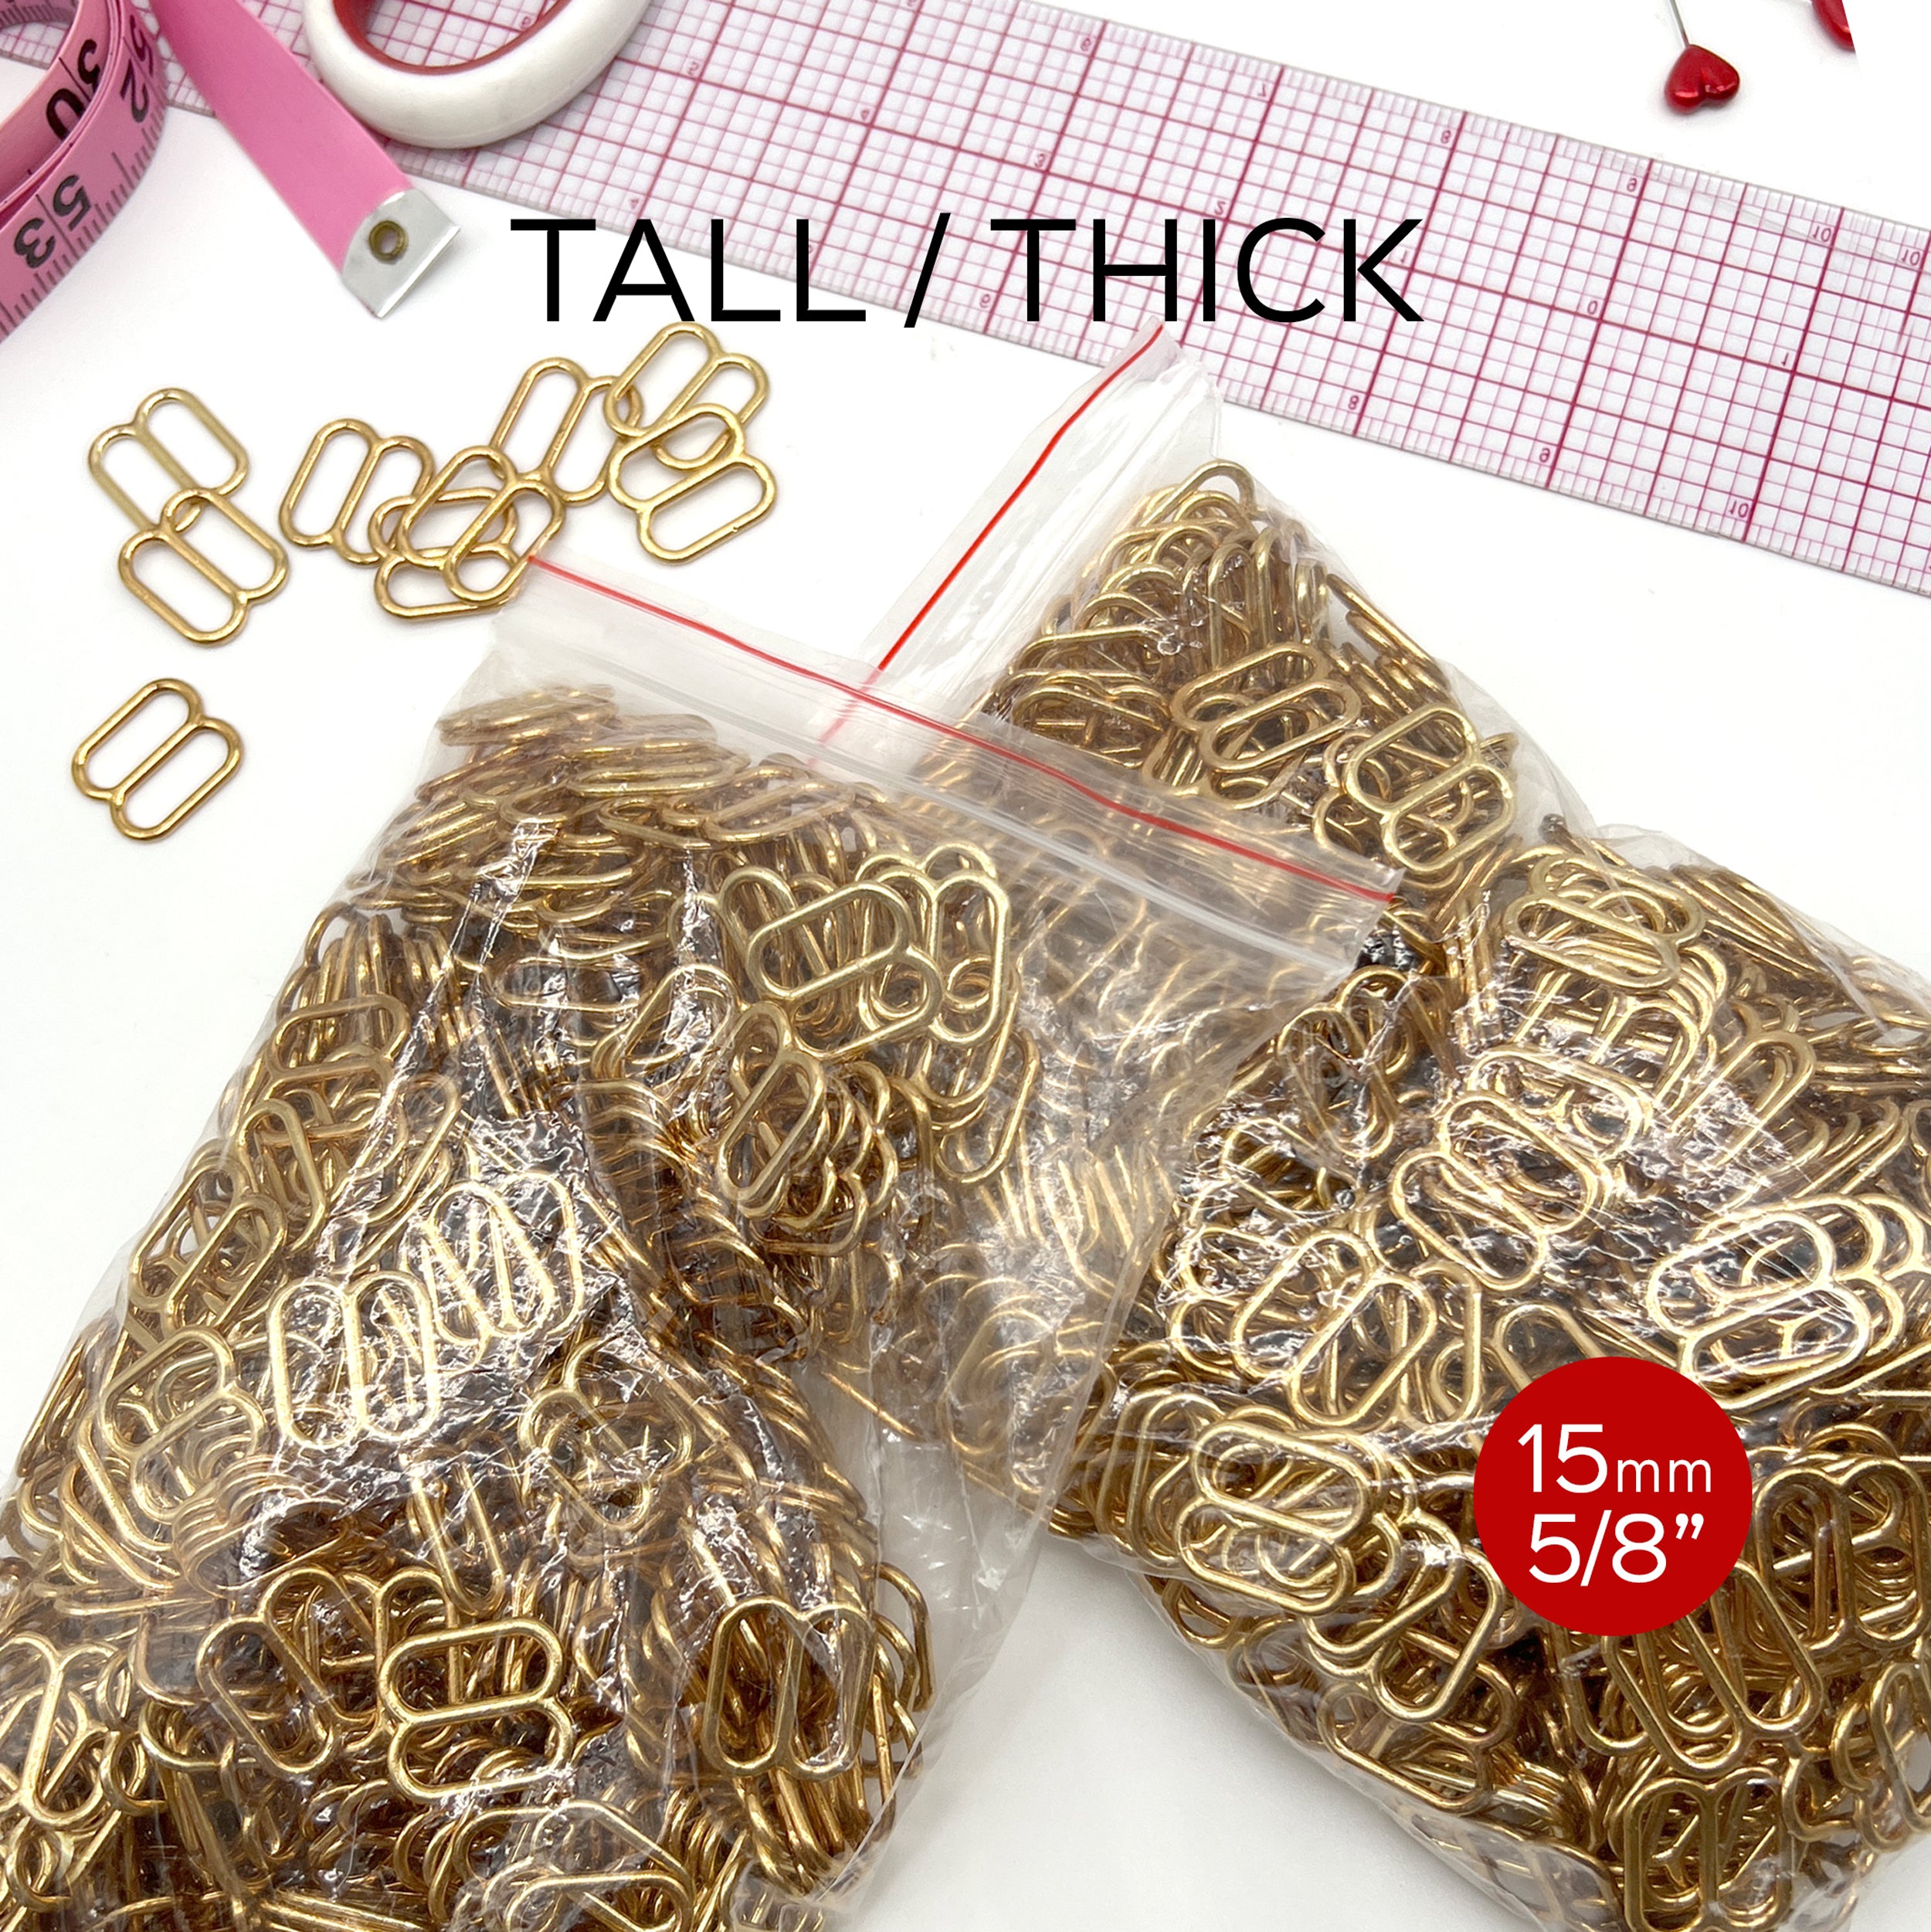 CLEARANCE- 484 Pair of Tall Thick Sliders in Gold for Swimwear or Bra making- 5/8" / 15mm - Stitch Love Studio